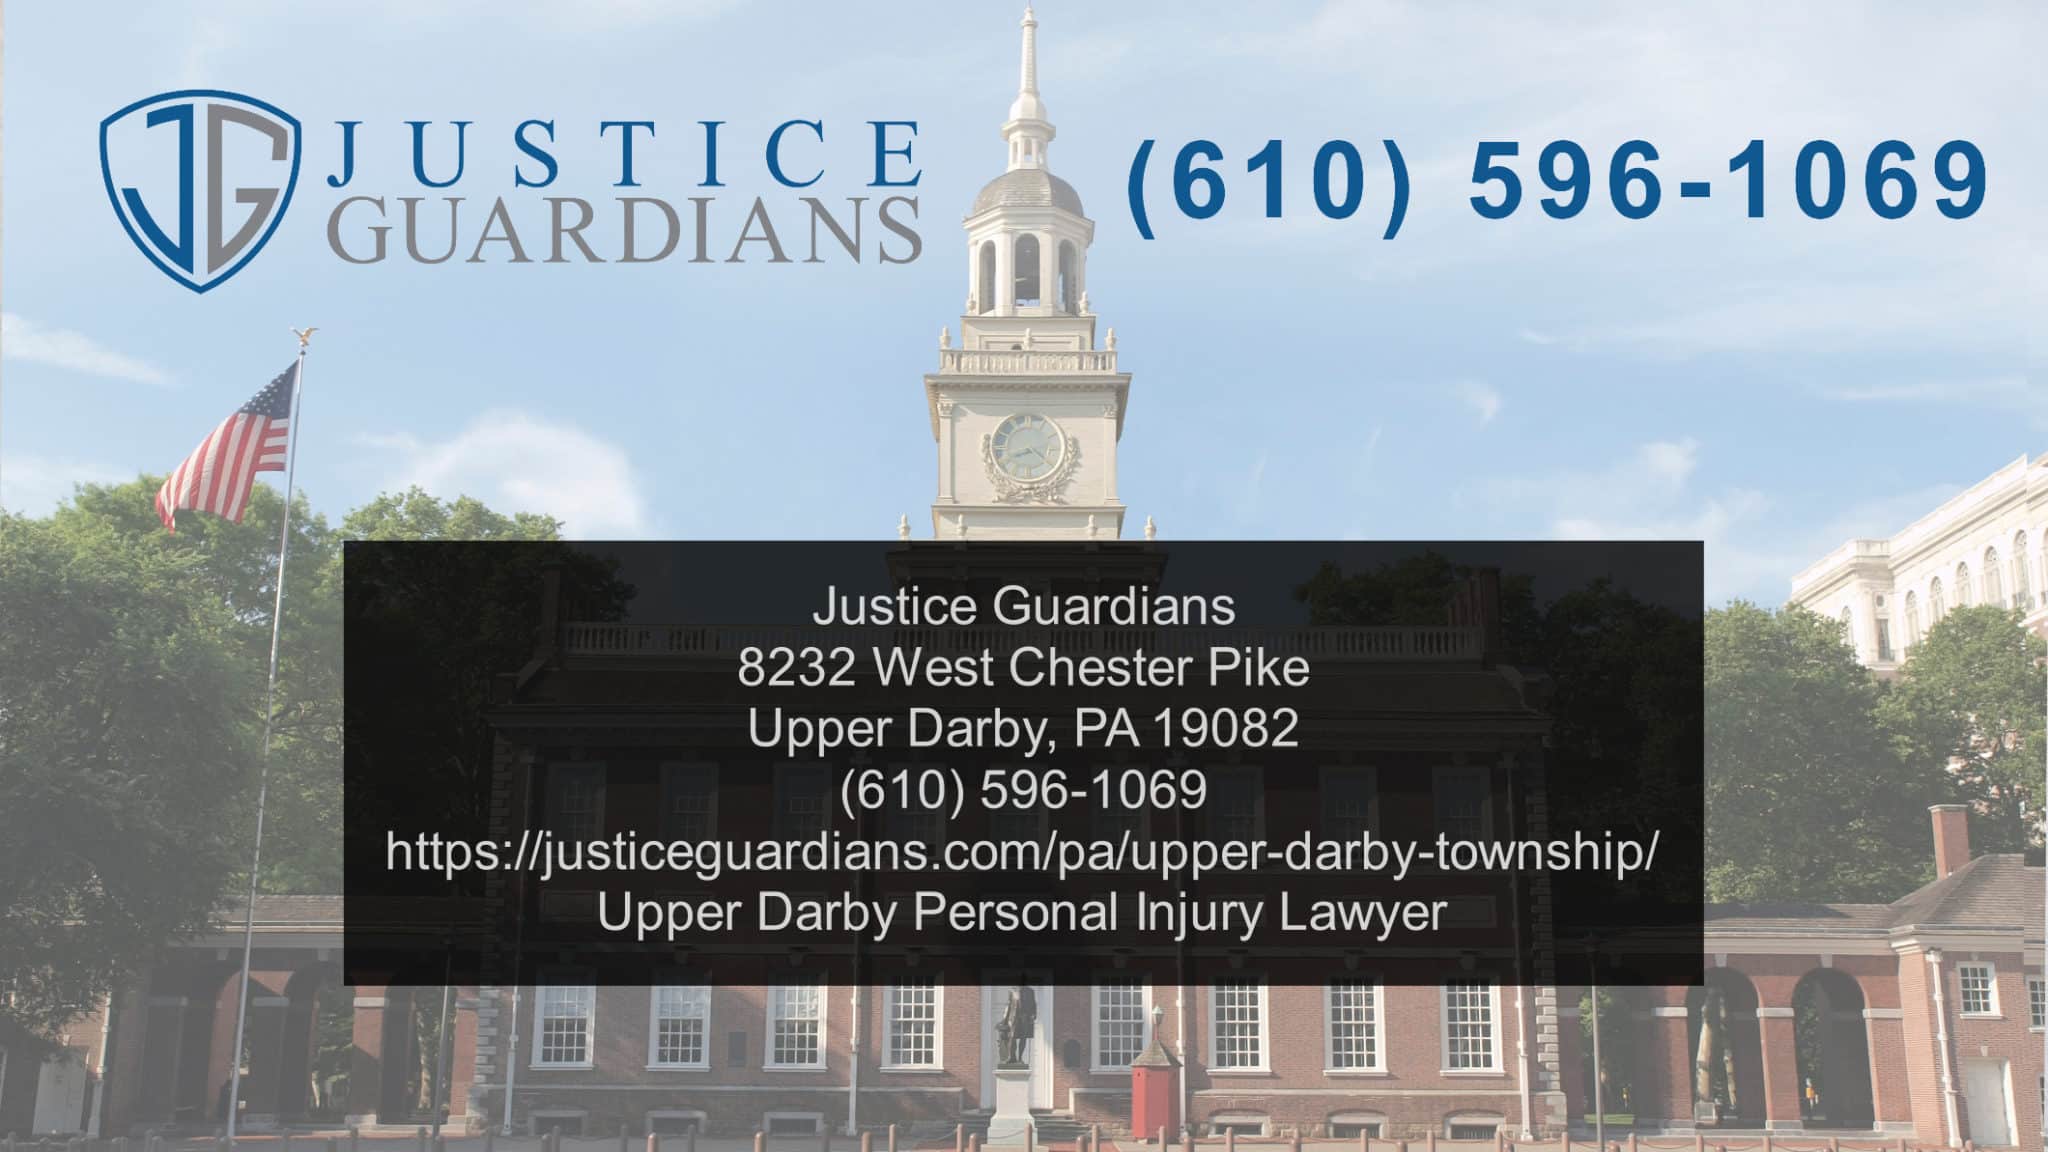 Hire Top Upper Darby Lawyers For DUI Car Accident Injury Case Representation